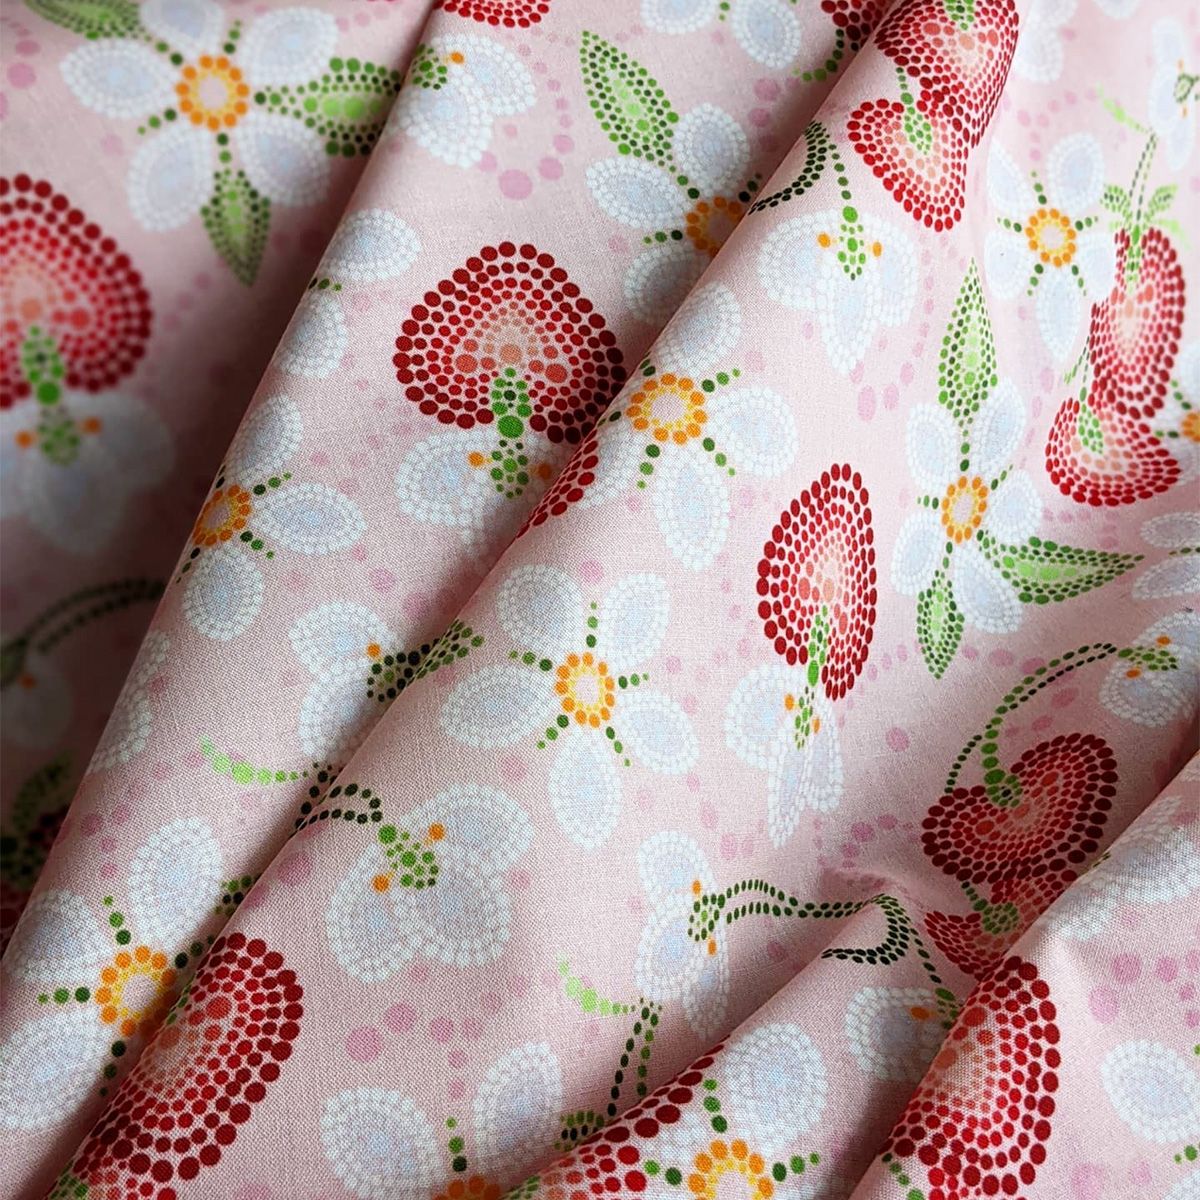 Indigenous Nouveau fabric featuring stylized red strawberries on a pink background